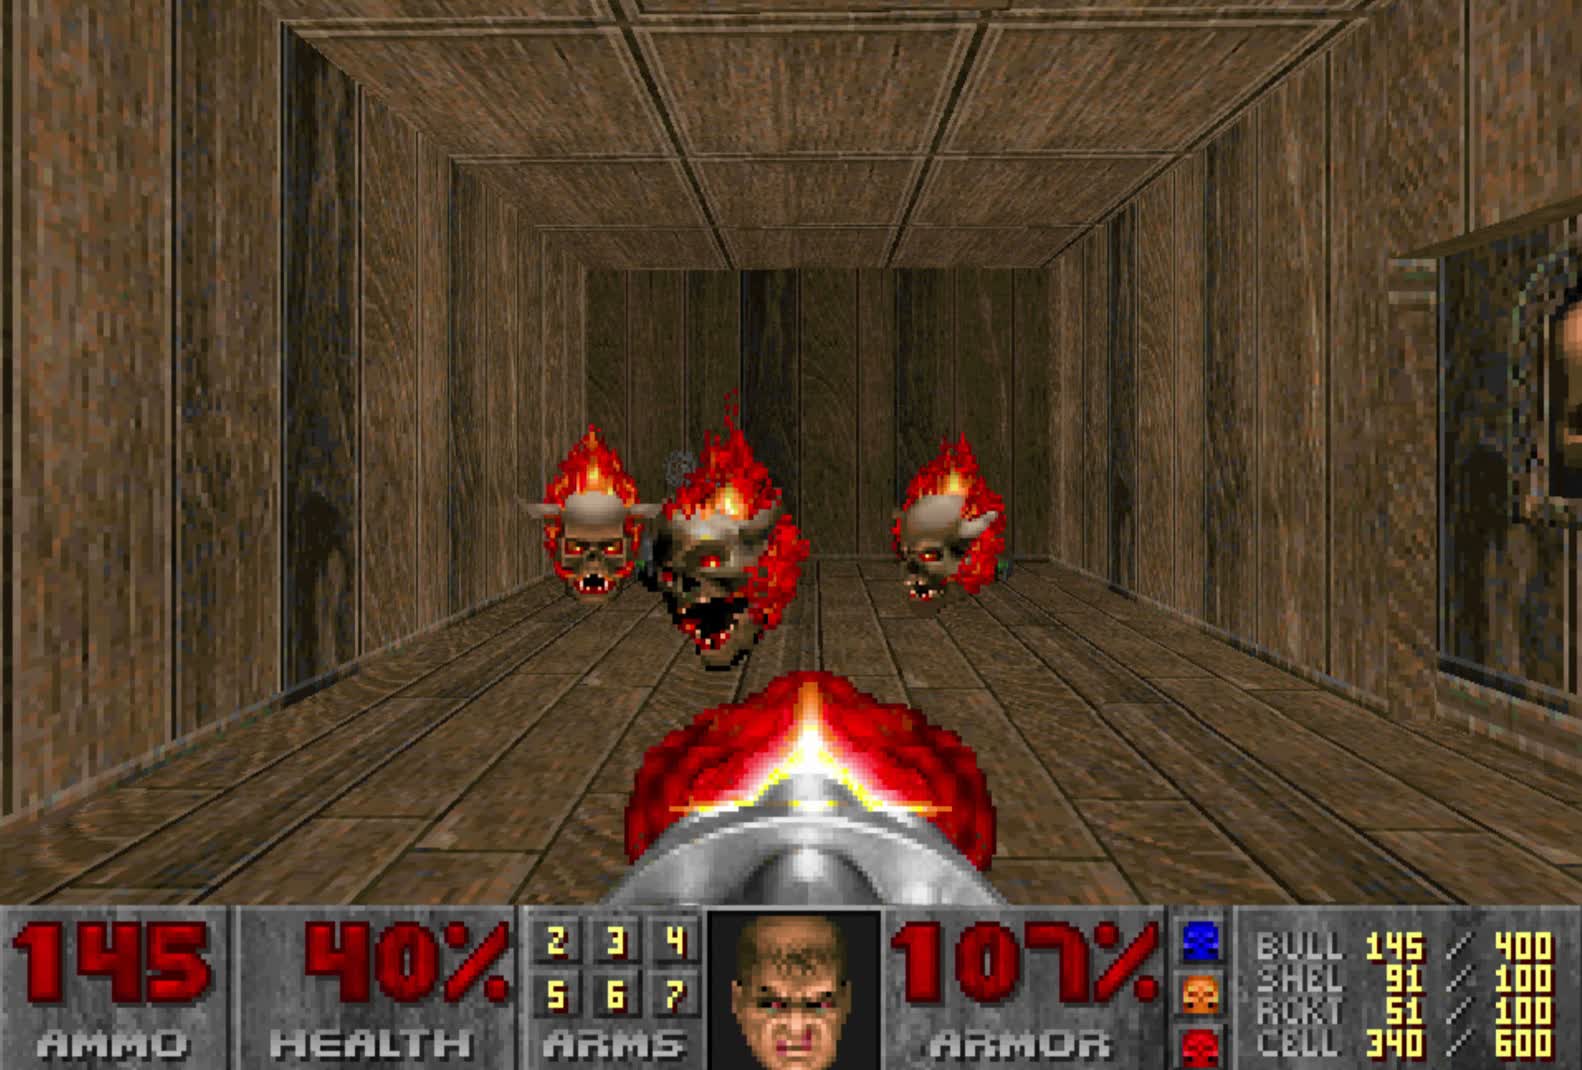 Overclocking challenge: Run Doom at 25fps using only an ISA-based graphics card from 30 years ago